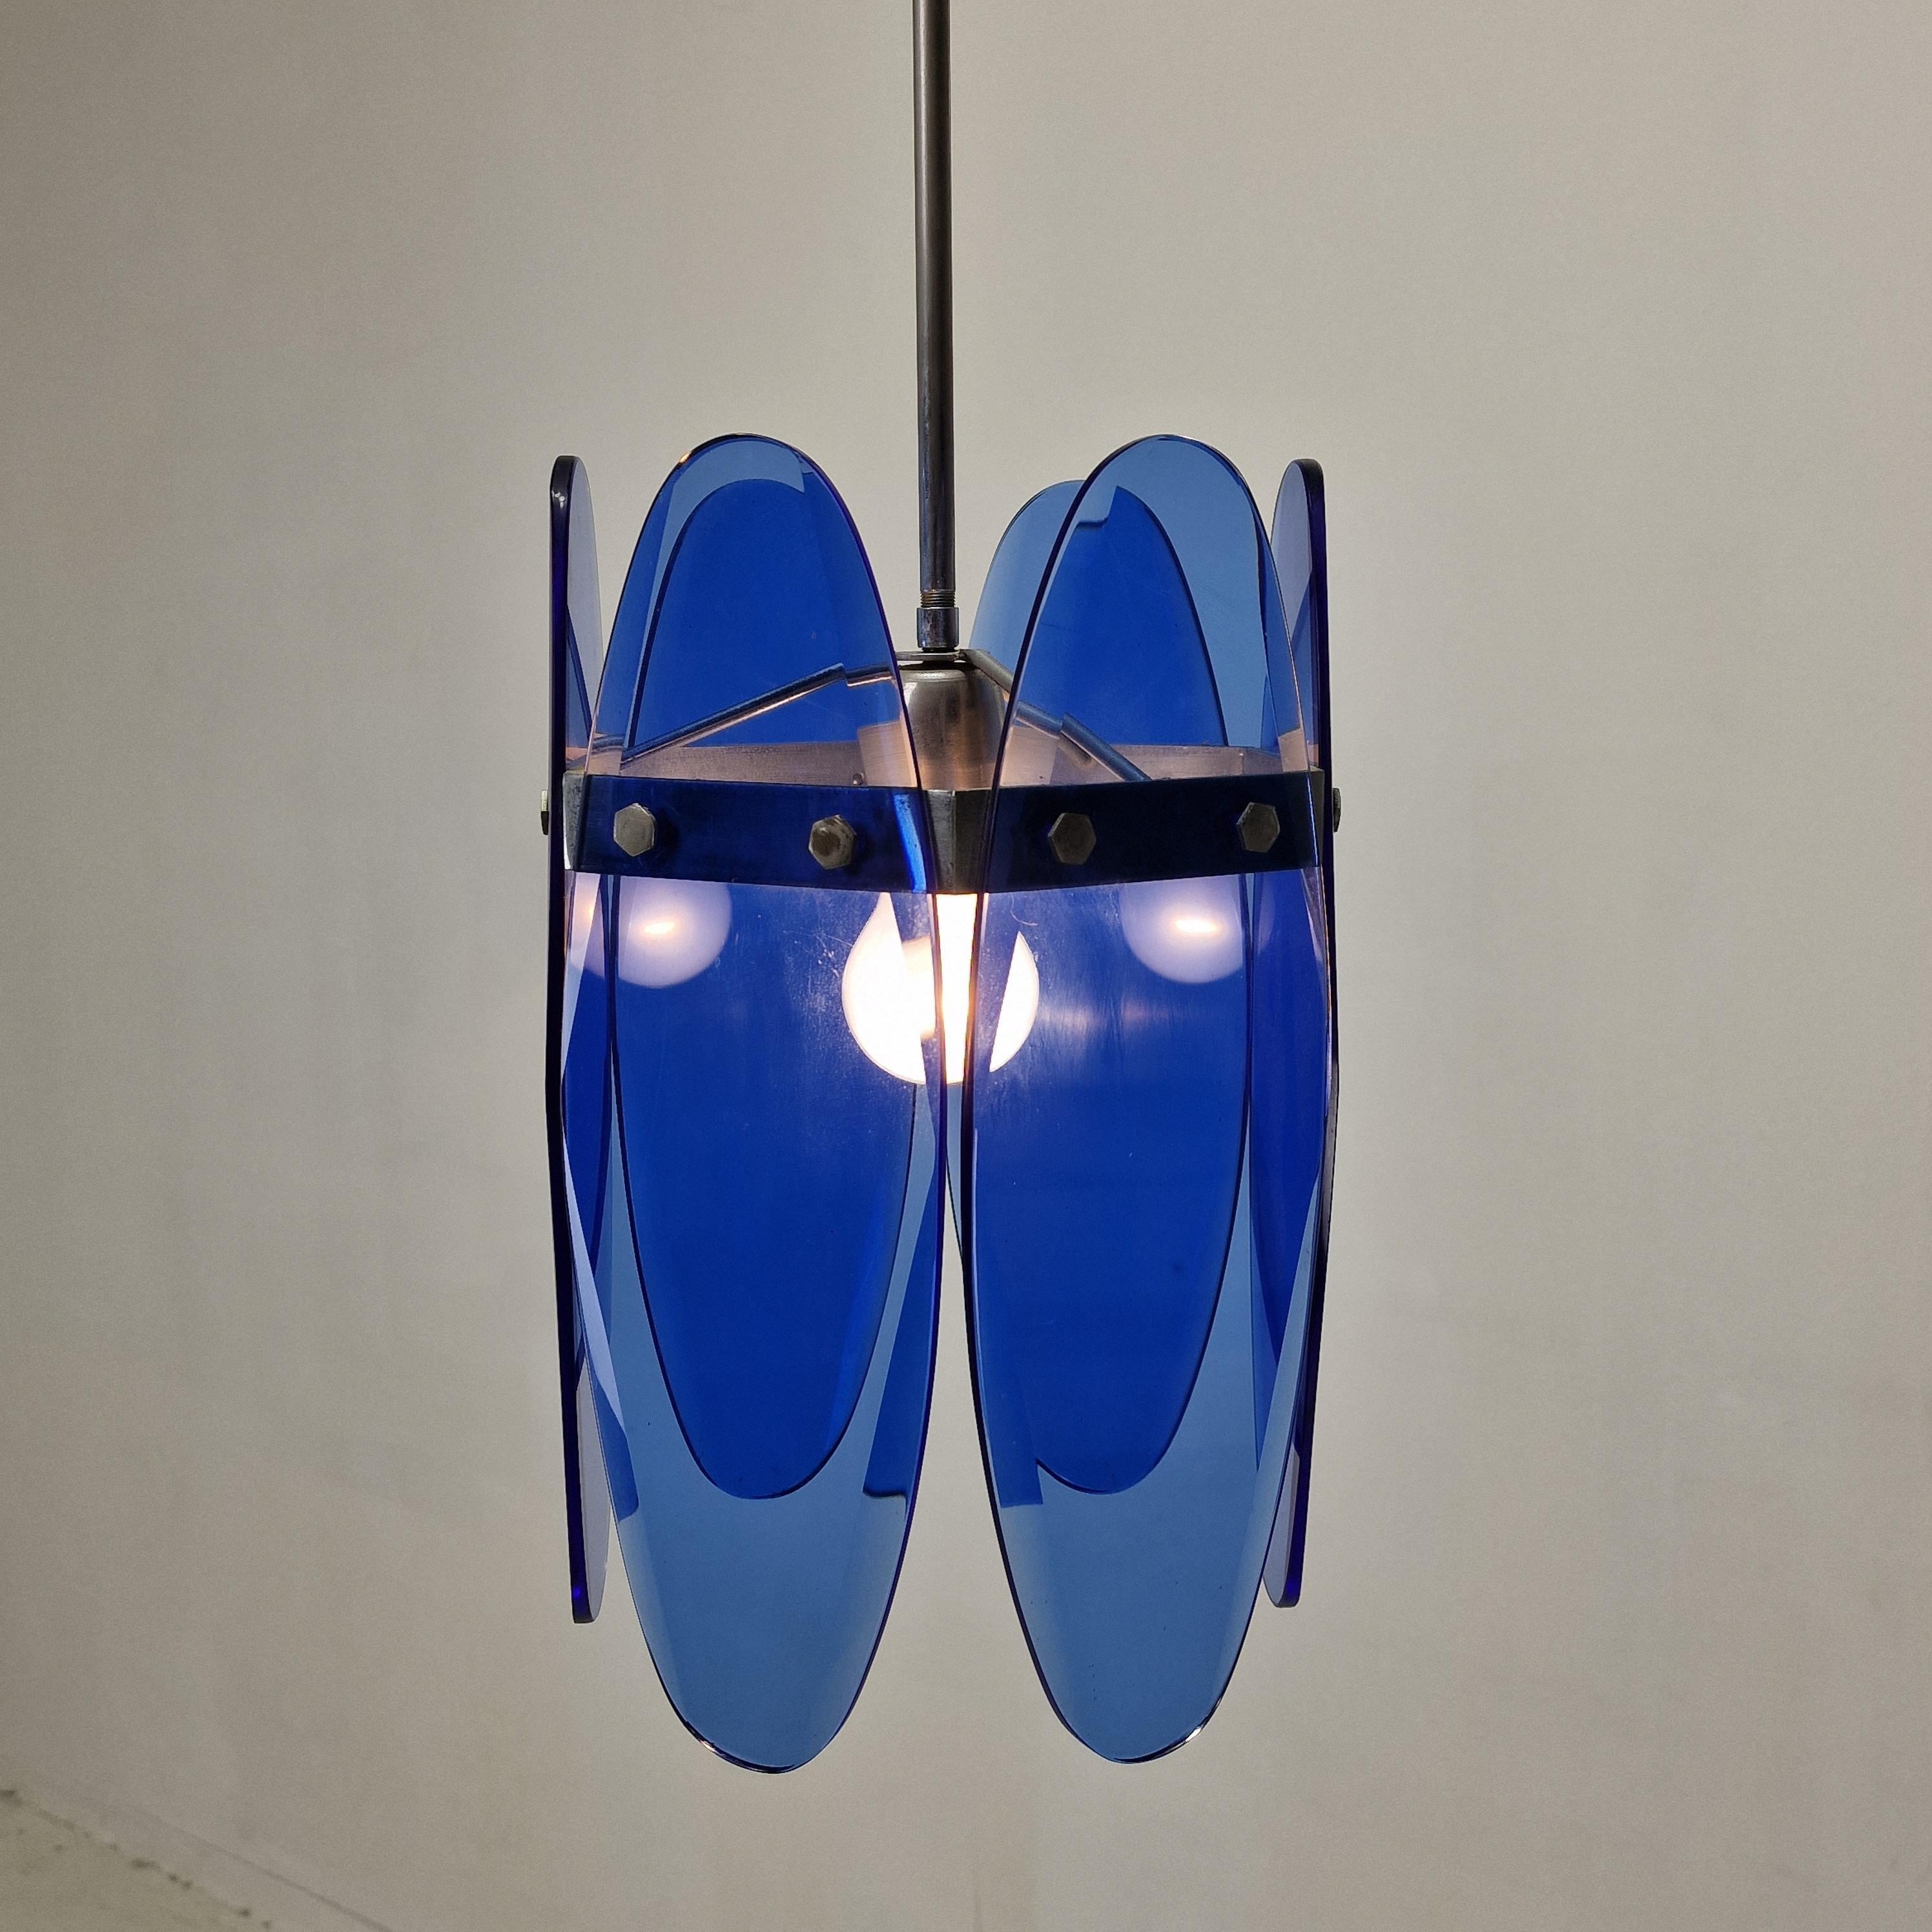 Late 20th Century Mid-Century Modern Blue Glass Chandelier or Pendant by Veca, Italy 1970's For Sale